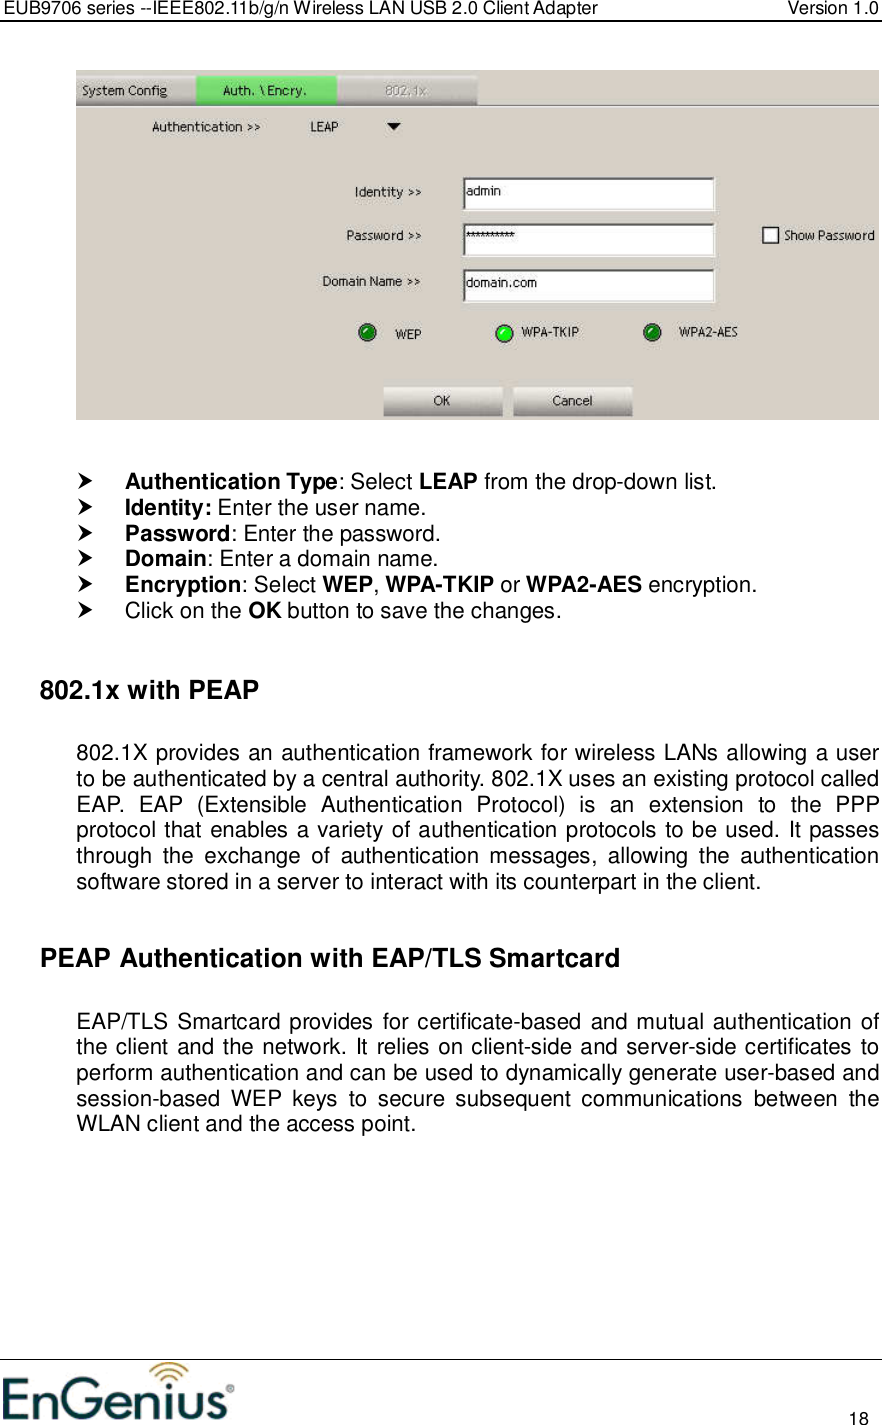 EUB9706 series --IEEE802.11b/g/n Wireless LAN USB 2.0 Client Adapter  Version 1.0                                                                                                                          18      Authentication Type: Select LEAP from the drop-down list.   Identity: Enter the user name.  Password: Enter the password.  Domain: Enter a domain name.  Encryption: Select WEP, WPA-TKIP or WPA2-AES encryption.   Click on the OK button to save the changes.     802.1x with PEAP  802.1X provides an authentication framework for wireless LANs allowing a user to be authenticated by a central authority. 802.1X uses an existing protocol called EAP.  EAP  (Extensible  Authentication  Protocol)  is  an  extension  to  the  PPP protocol that enables a variety of authentication protocols to be used. It passes through  the  exchange  of  authentication  messages,  allowing  the  authentication software stored in a server to interact with its counterpart in the client.    PEAP Authentication with EAP/TLS Smartcard  EAP/TLS Smartcard provides for certificate-based and mutual authentication of the client and the network. It relies on client-side and server-side certificates to perform authentication and can be used to dynamically generate user-based and session-based  WEP  keys  to  secure  subsequent  communications  between  the WLAN client and the access point.  